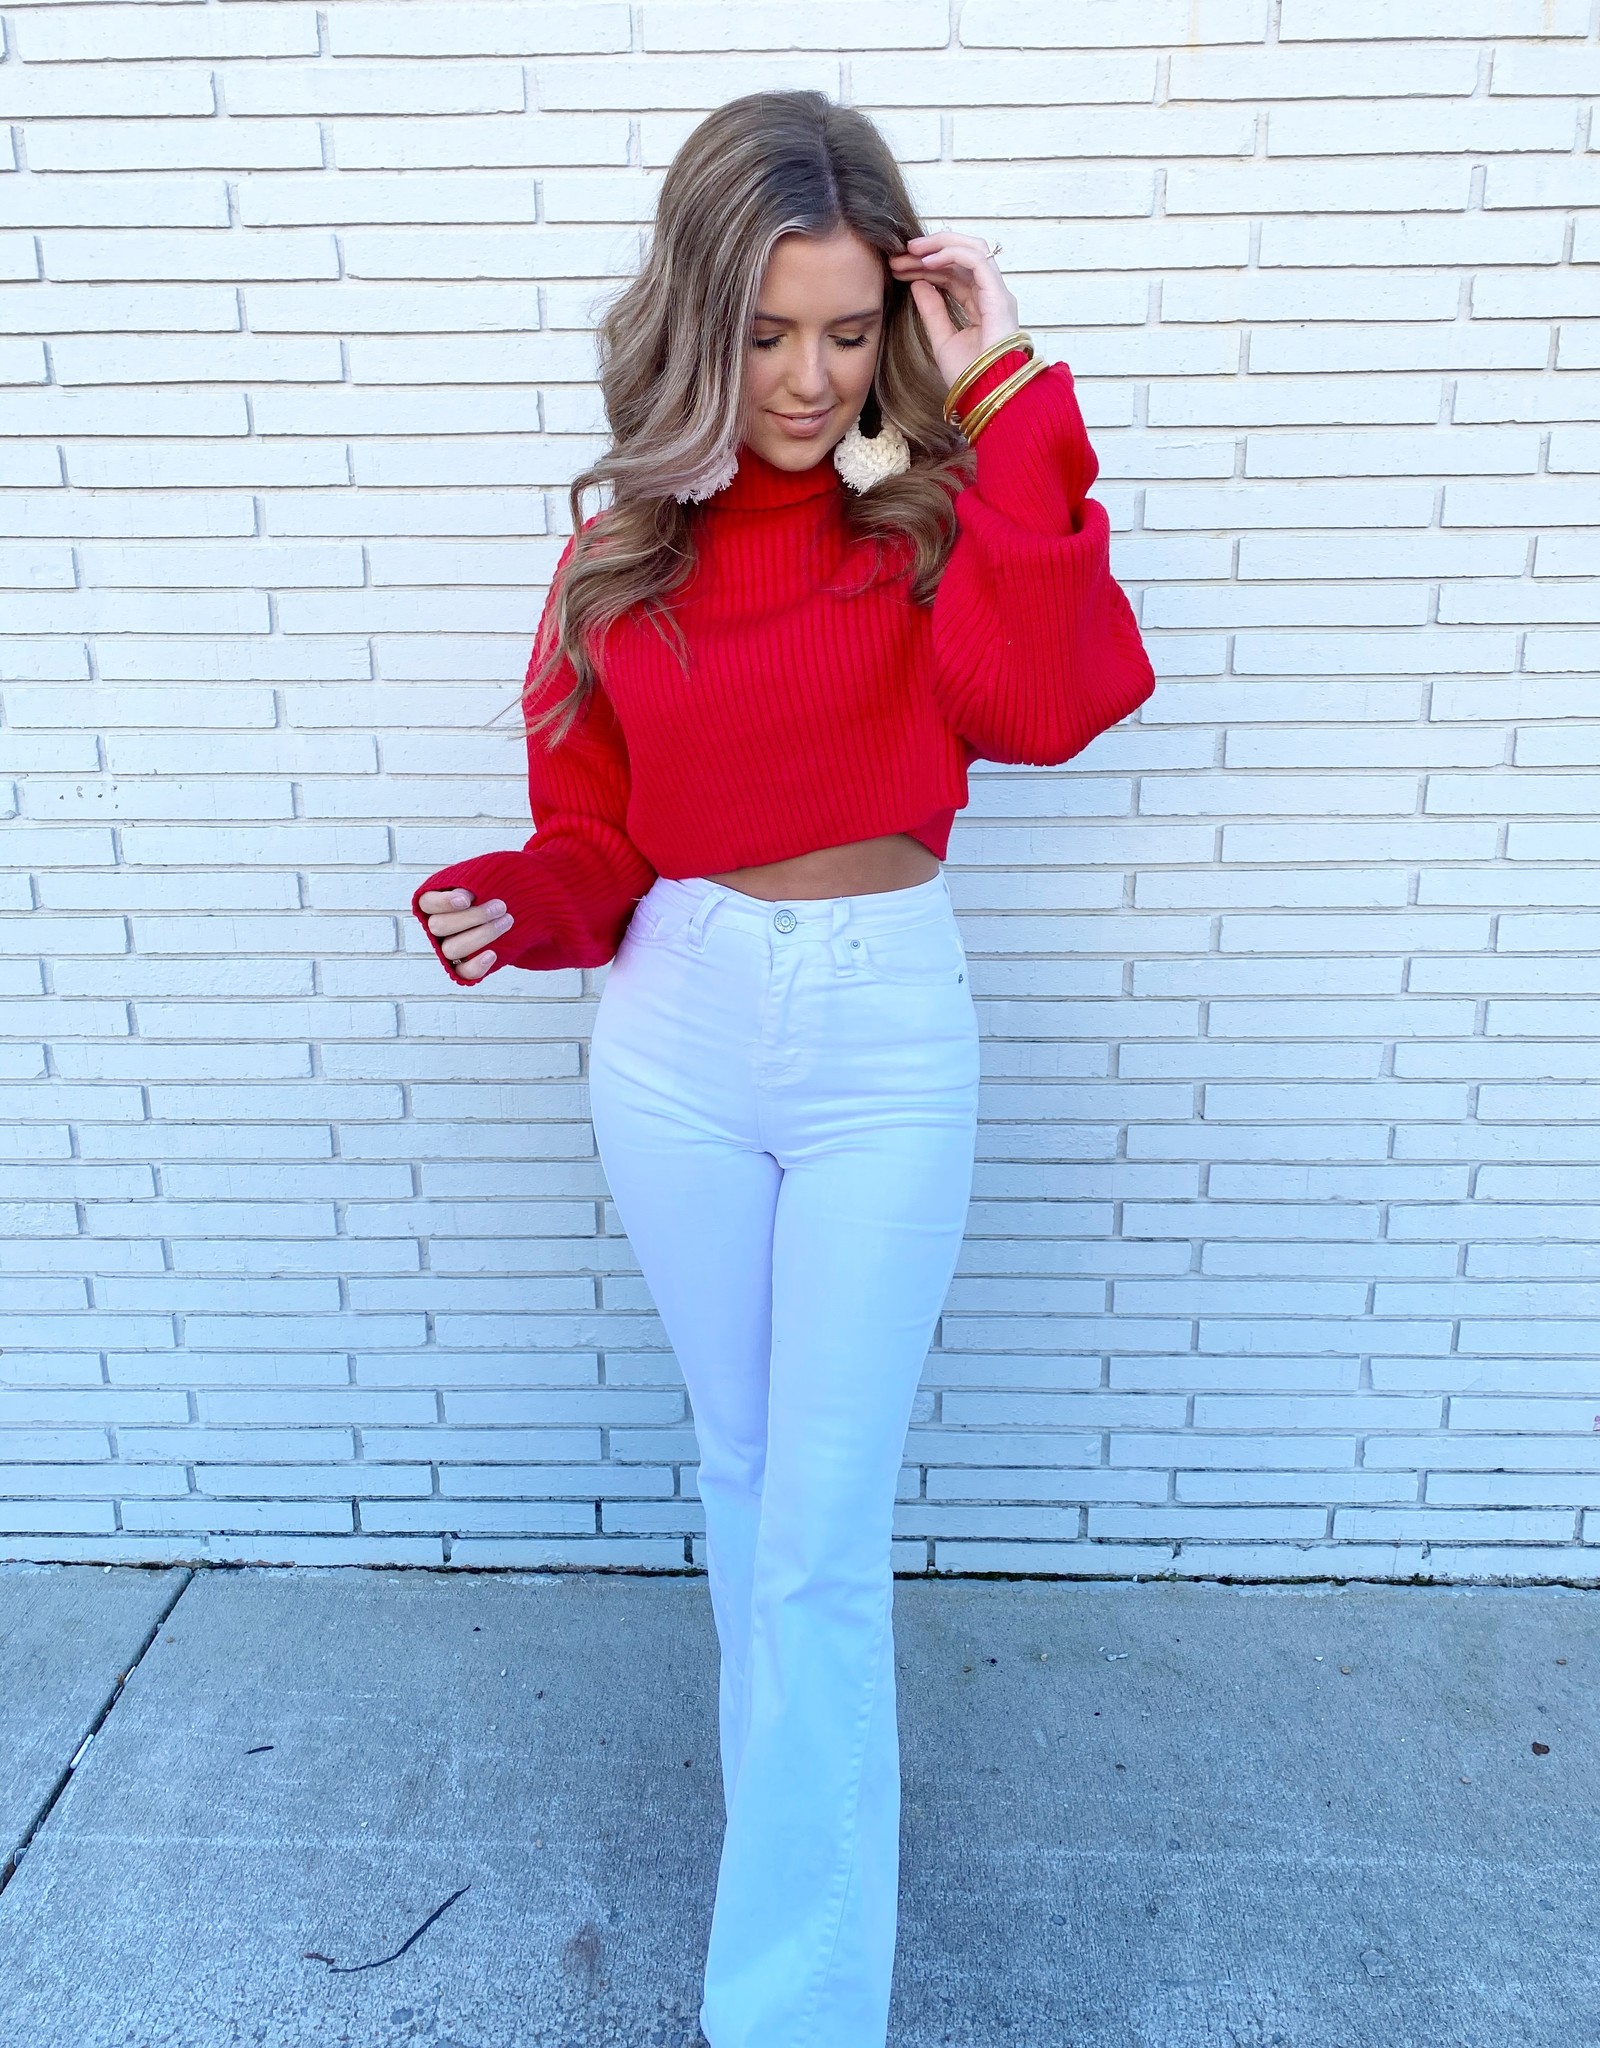 Seeing red sweater